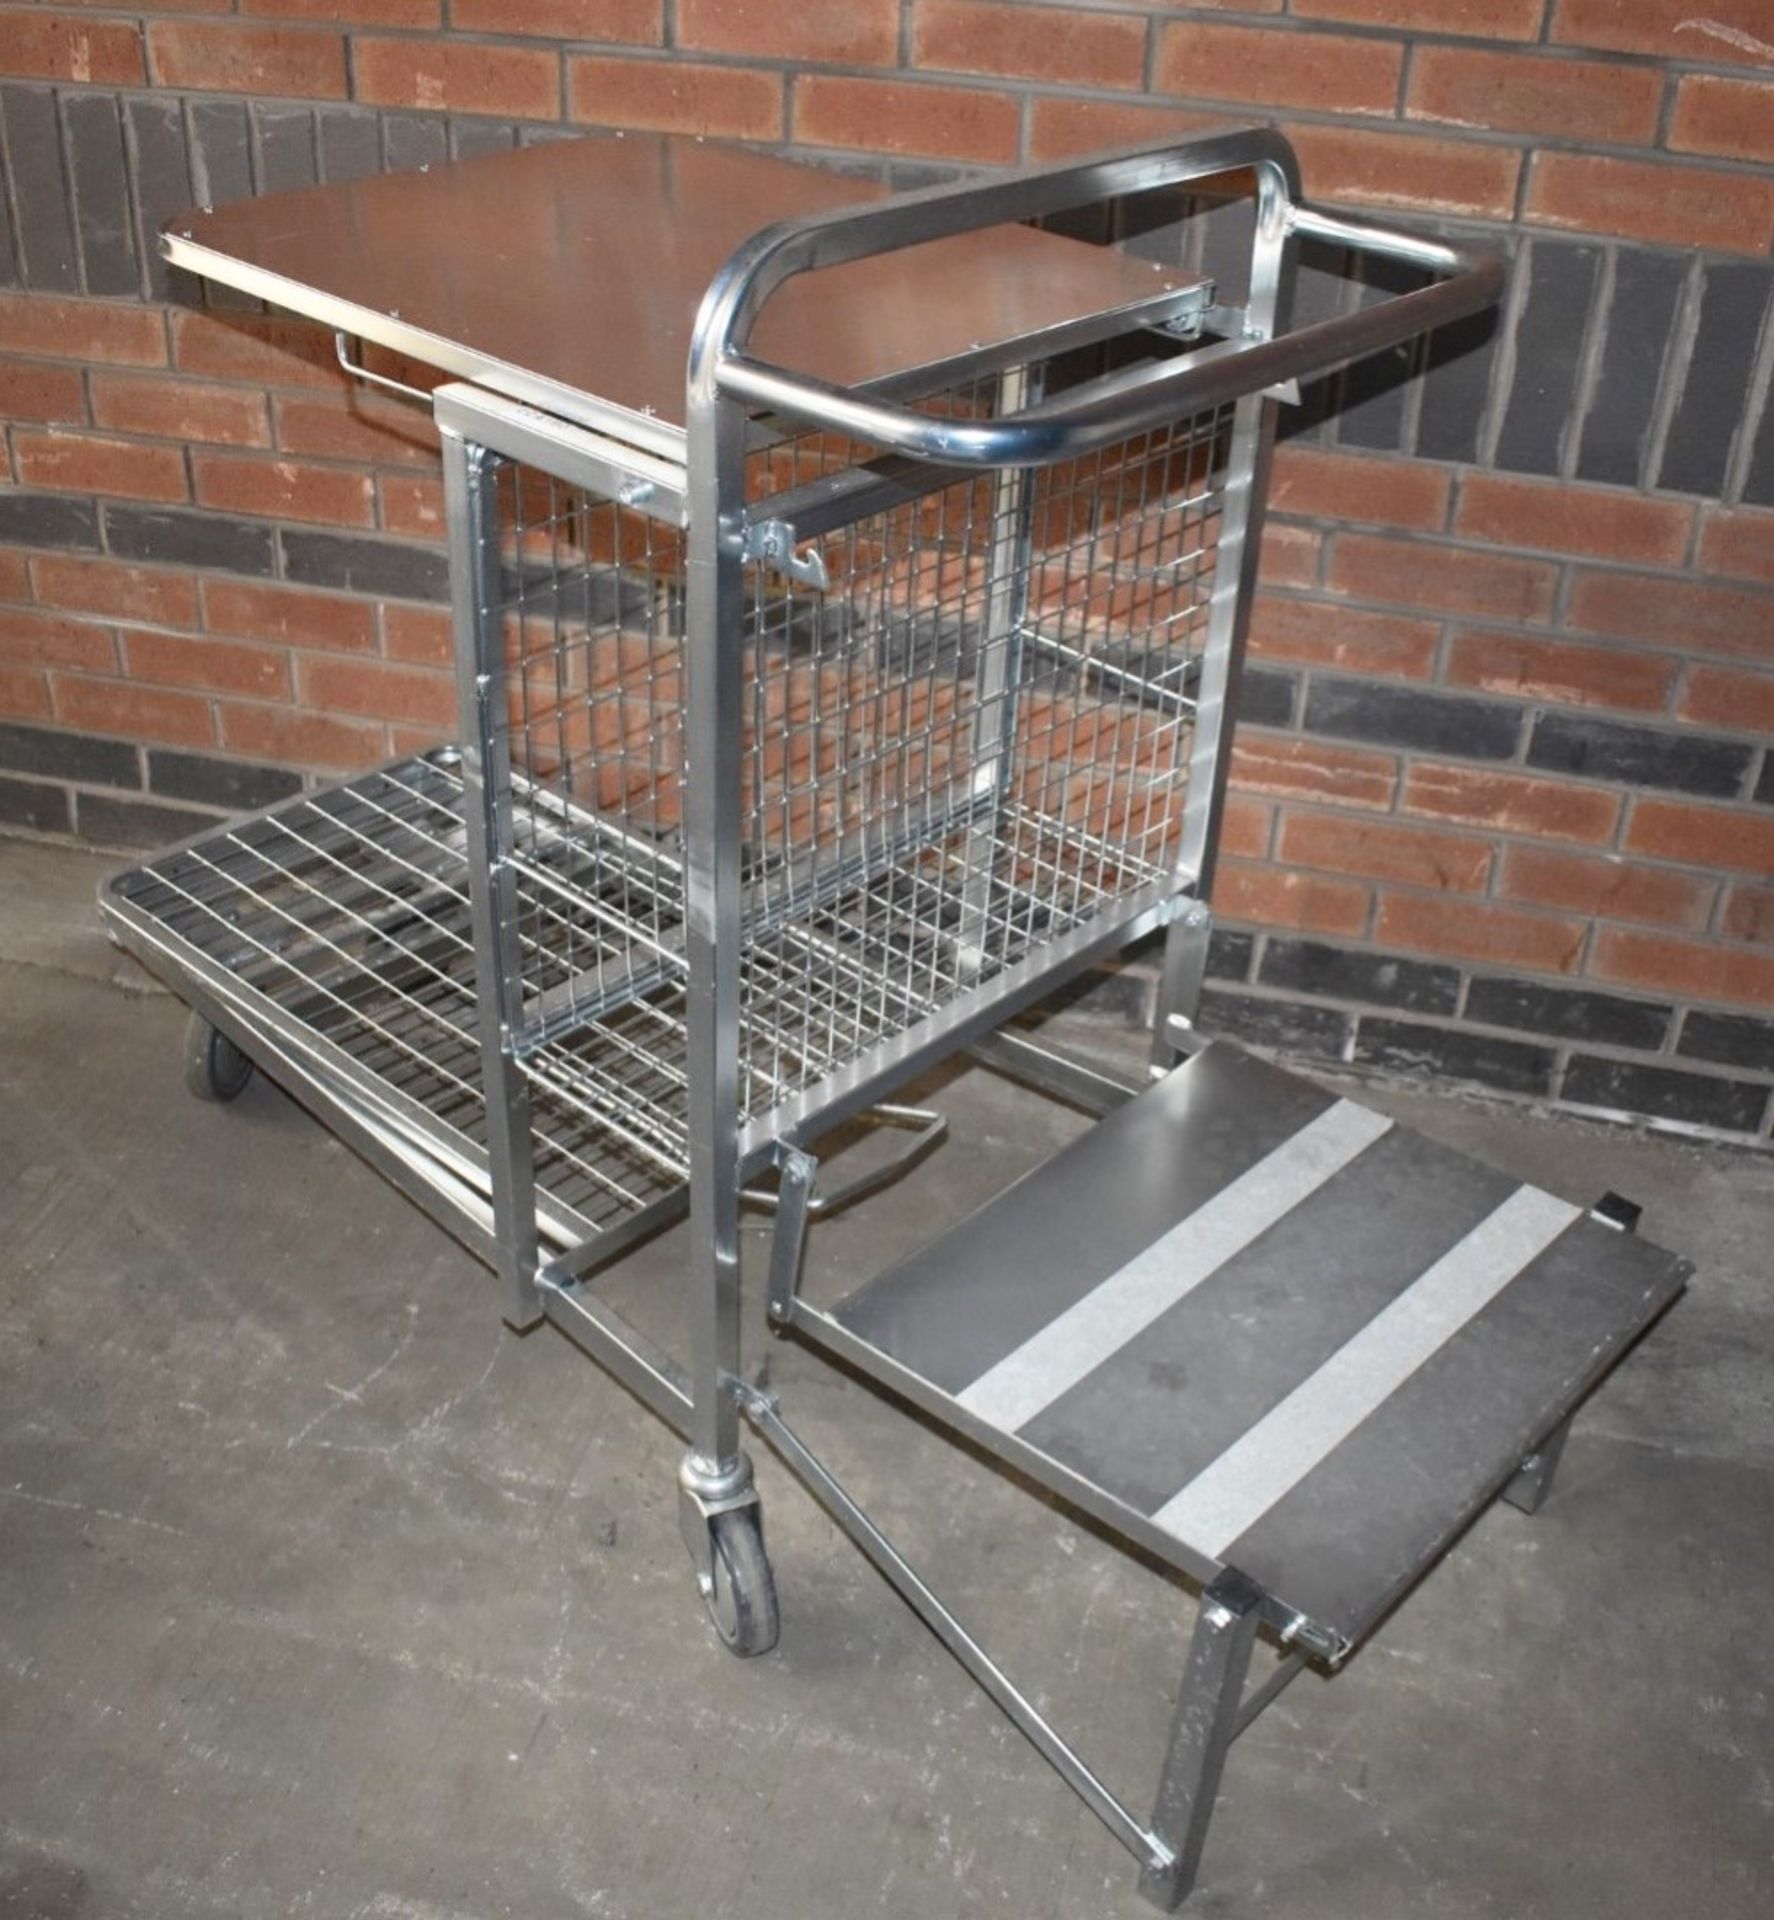 1 x Supermarket Retail Merchandising Trolley With Pull Out Step and Folding Shelf - Dimensions: - Image 2 of 9